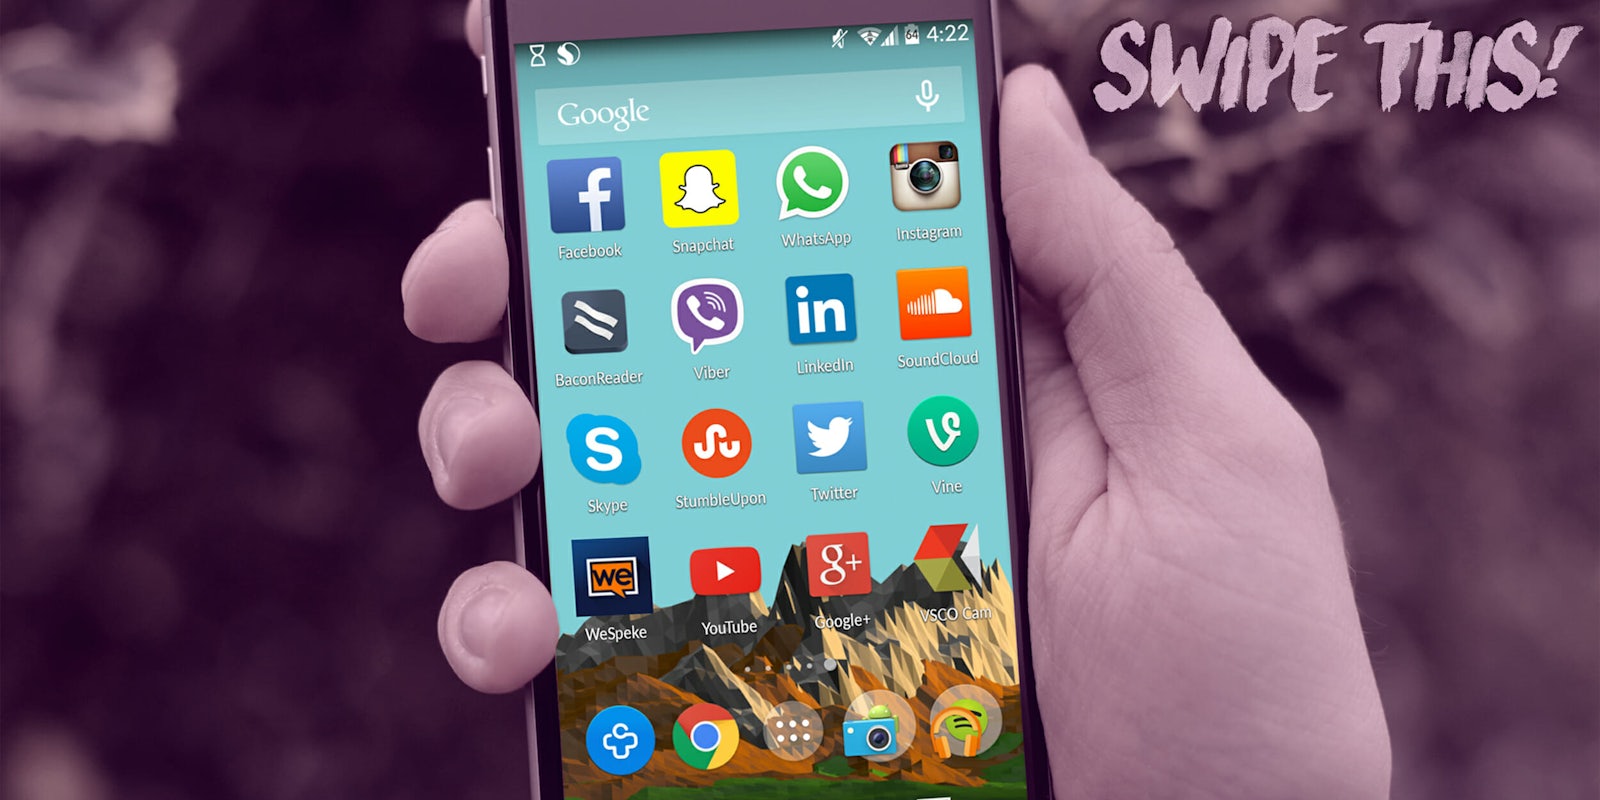 Hand holding phone with social media app icons